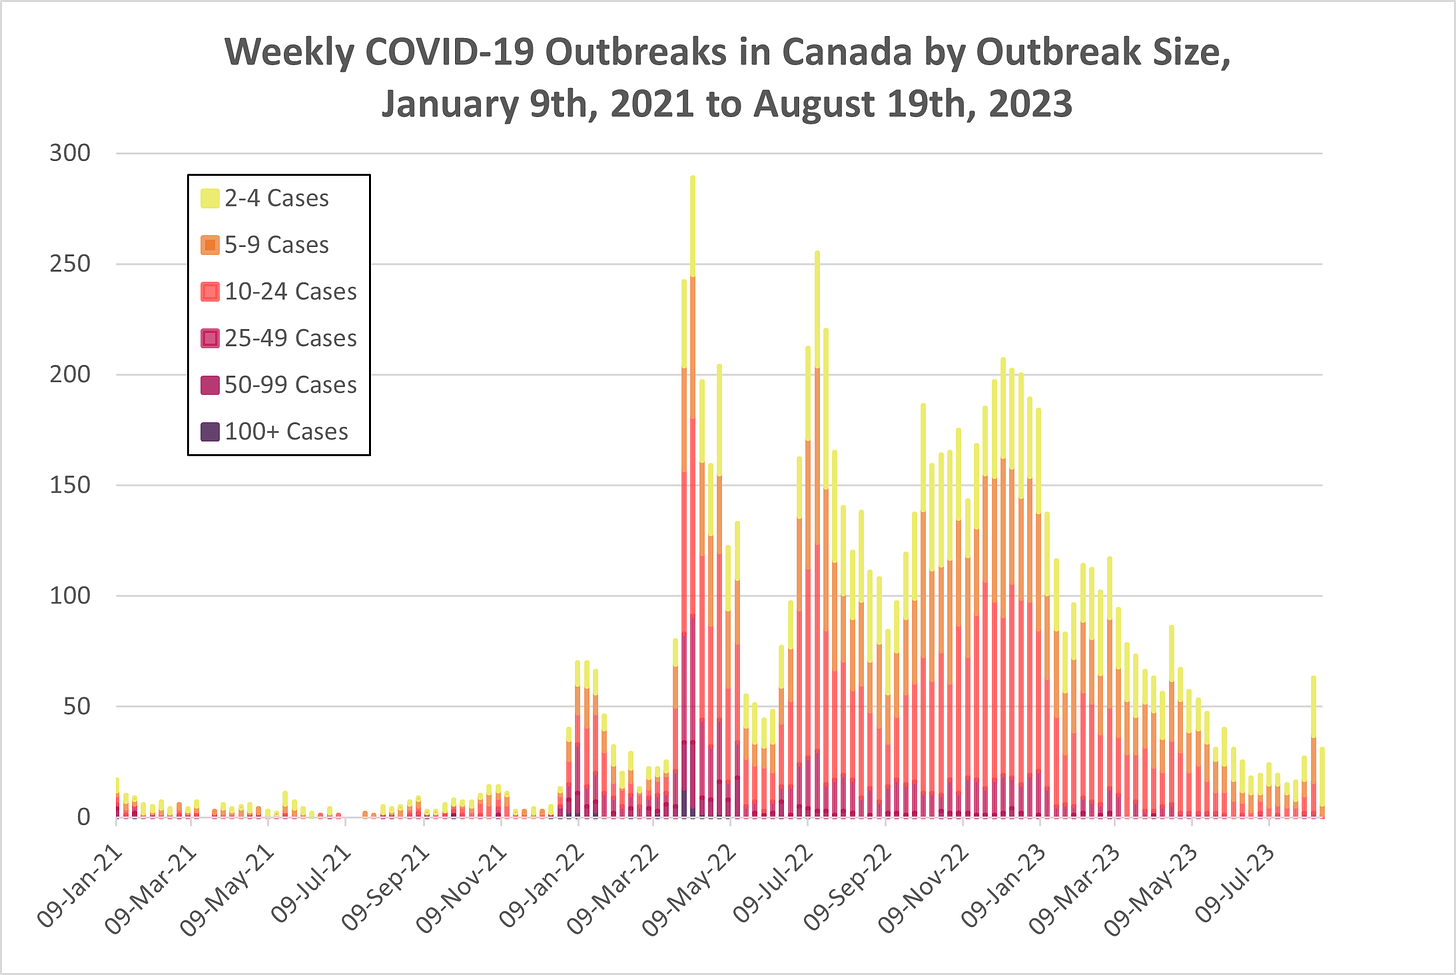 Stacked bar chart of weekly outbreaks by outbreak size (2-4 cases, 5-9 cases, 10-24 cases, 25-49 cases, 50-99 cases, 100+ cases) in Canada from January 9th, 2021 to August 19th, 2023. Rates are below 20 throughout 2021, steeply rising to around 70. Outbreak rates then return to low levels, spike to around 300 in April 2022, return to lower levels though higher than the previous lull, spike again to around 250 in Summer 2022 then decrease to around 100 (a much higher lull), remain around 150-200 from October 2022 to January 2023, then from 50-100 until May 2023, then decrease to around 25 by mid-July. The figure shoots up to around 70 in the second-to-last week, and down to around 35 in the most recent week.